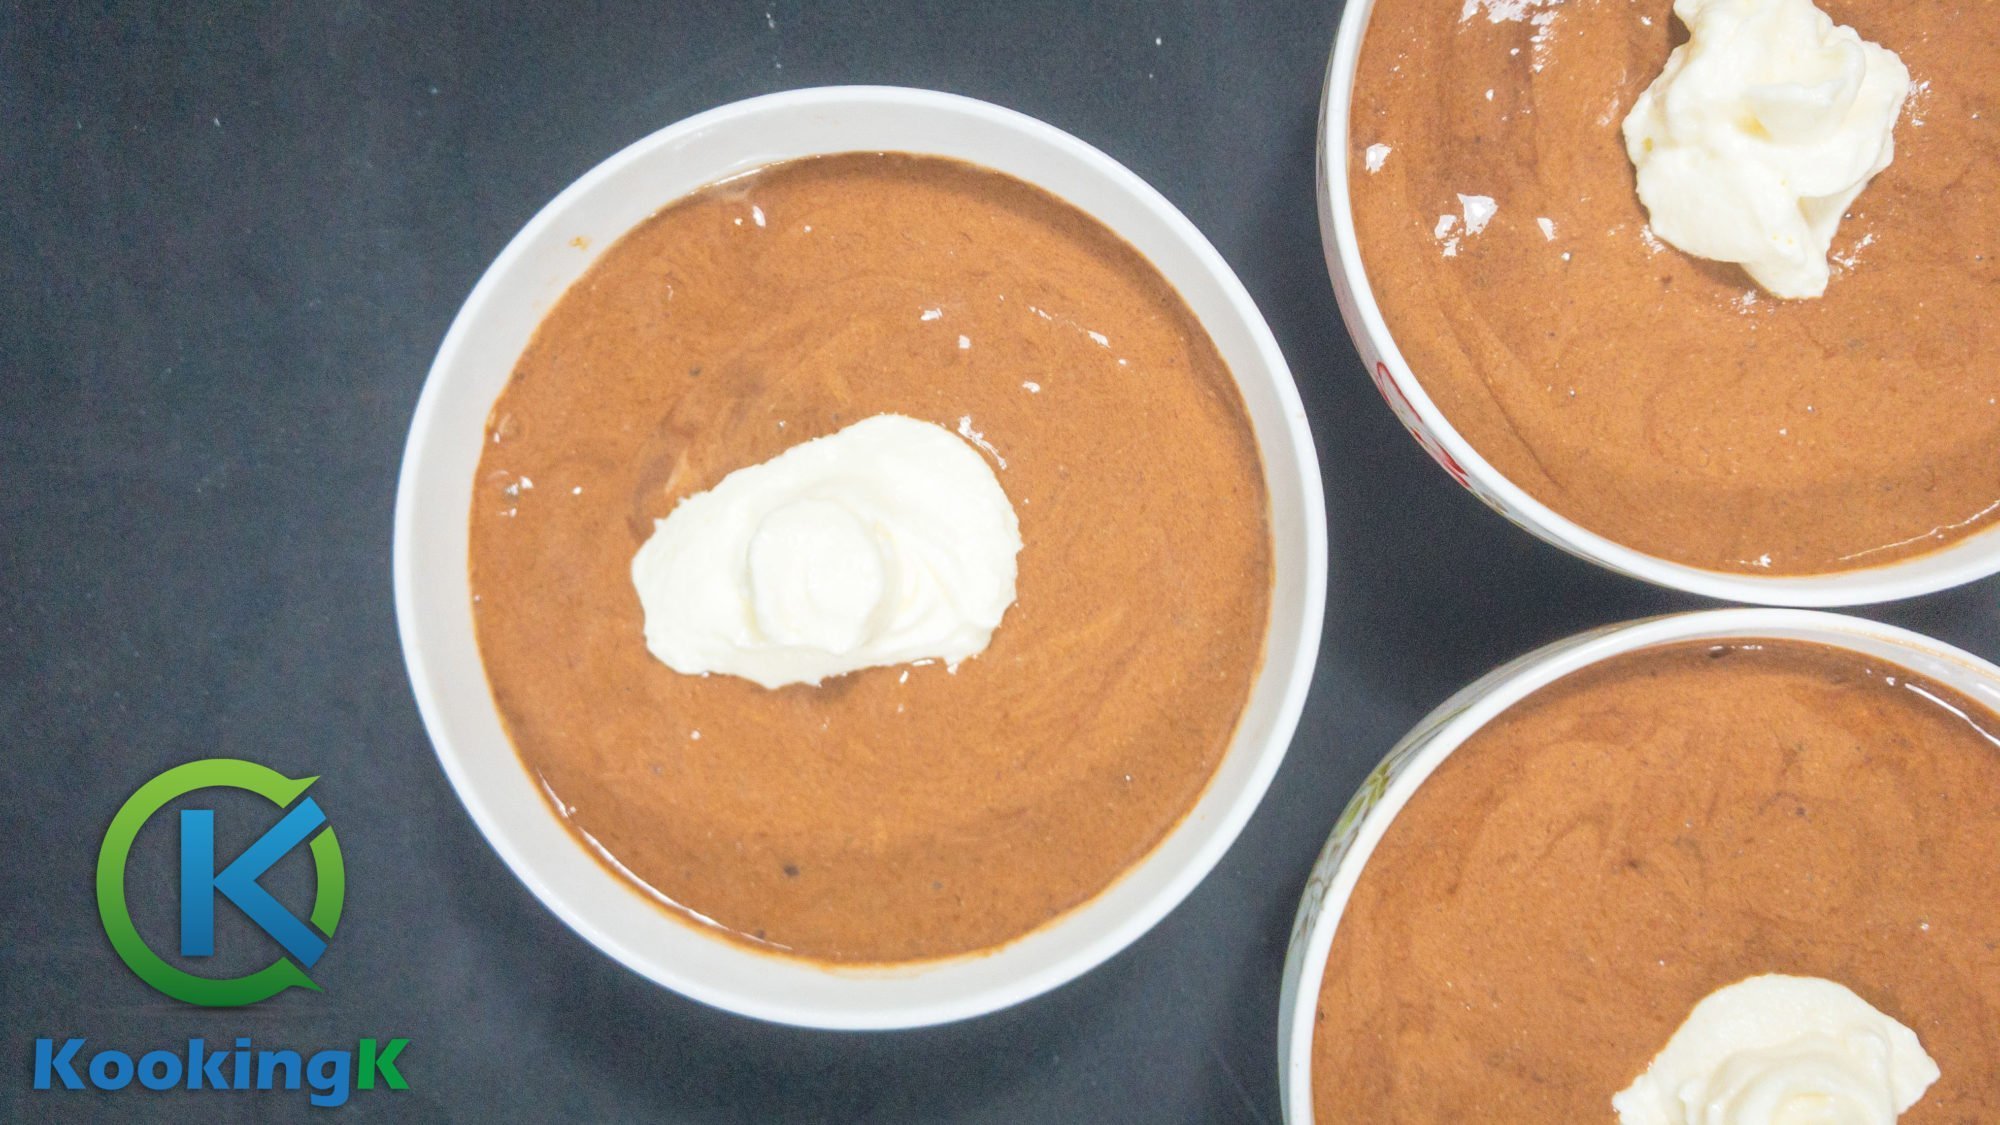 Eggless Banana and Chocolate Mousse Recipe by KooKingK